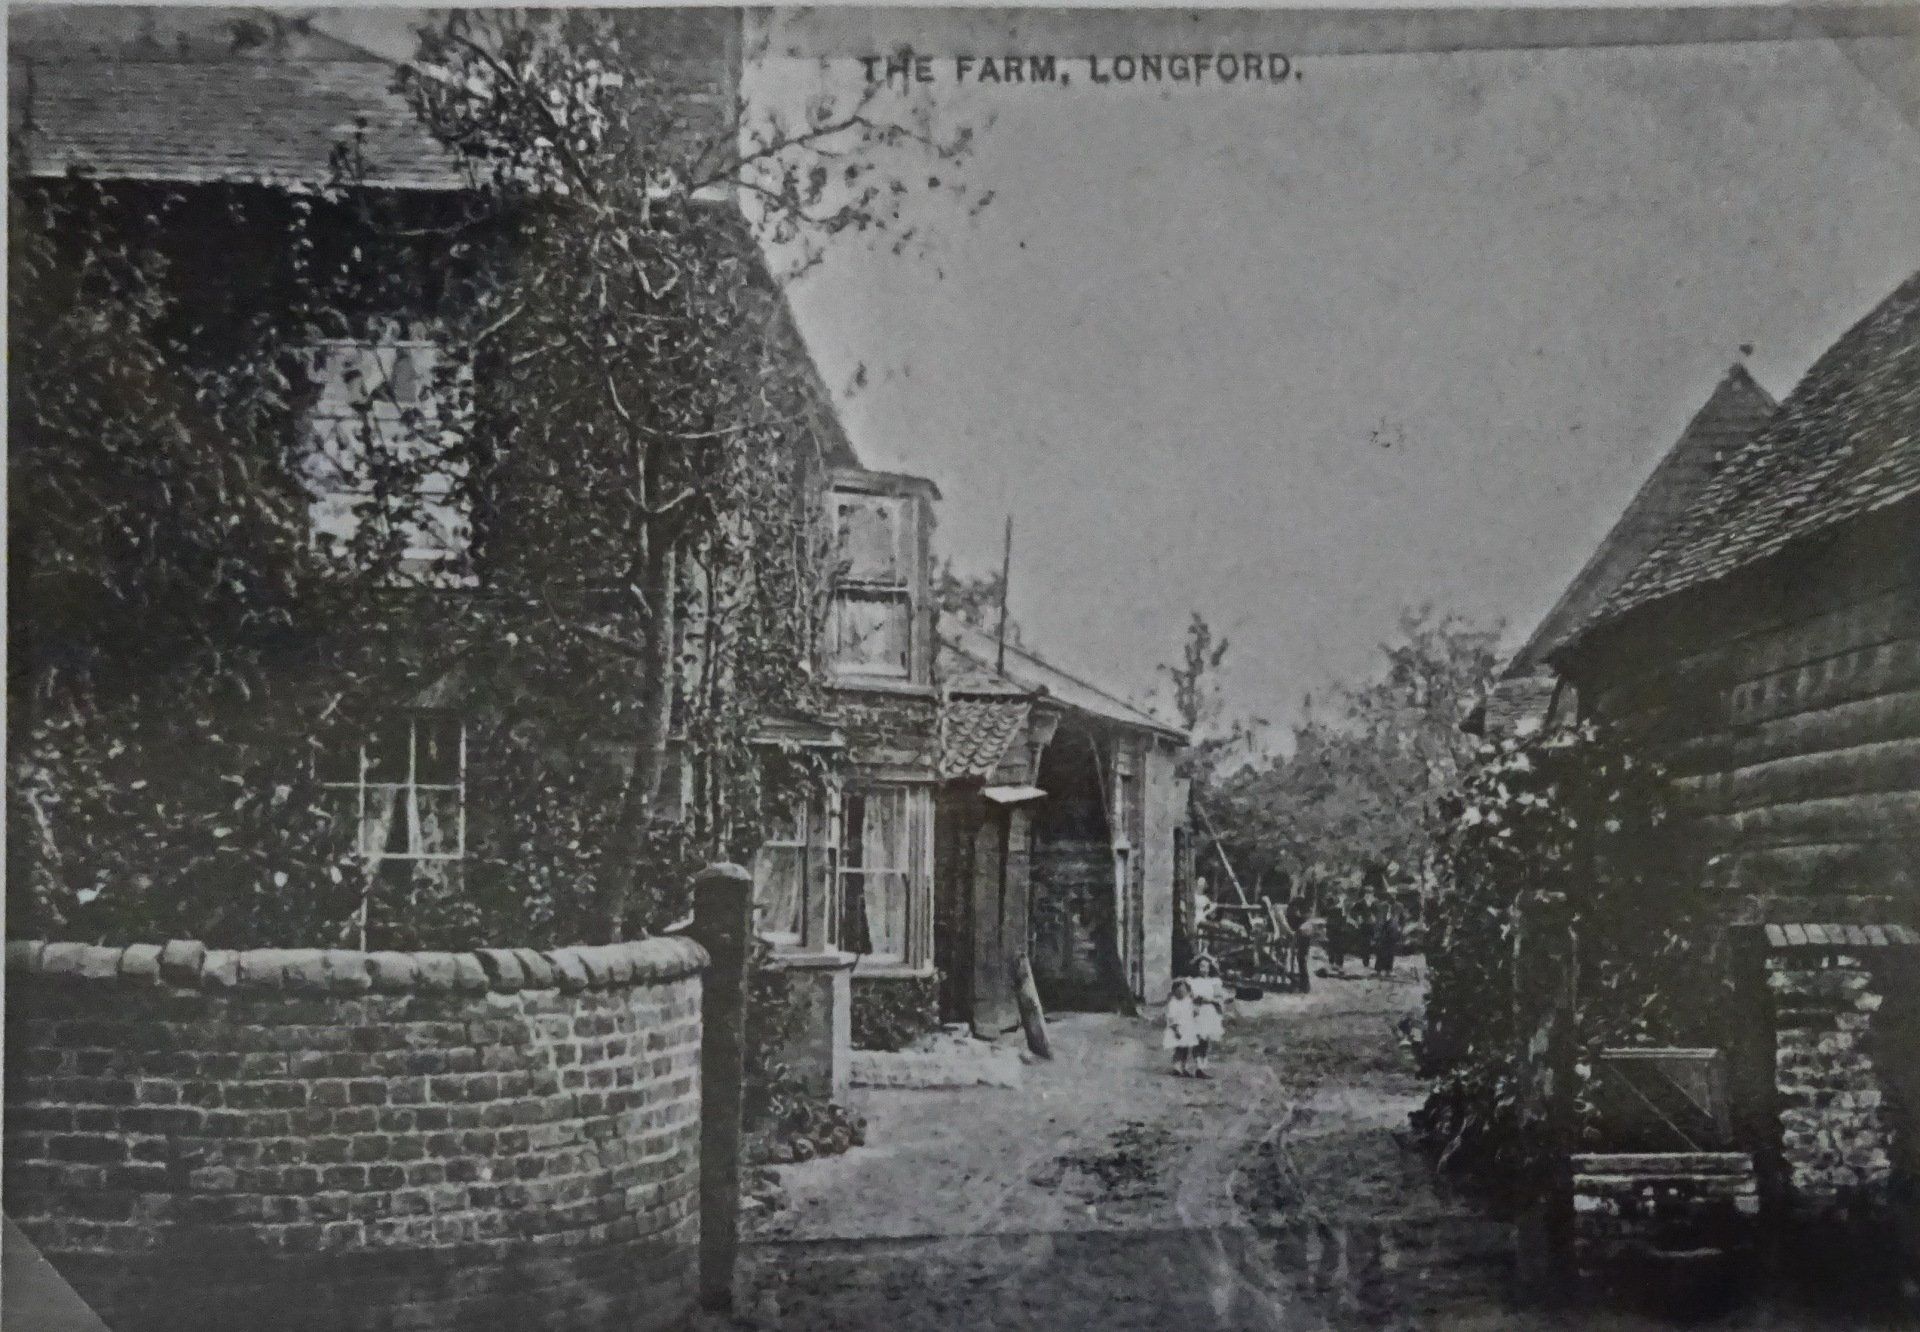 The Farm, Longford, Middlesex